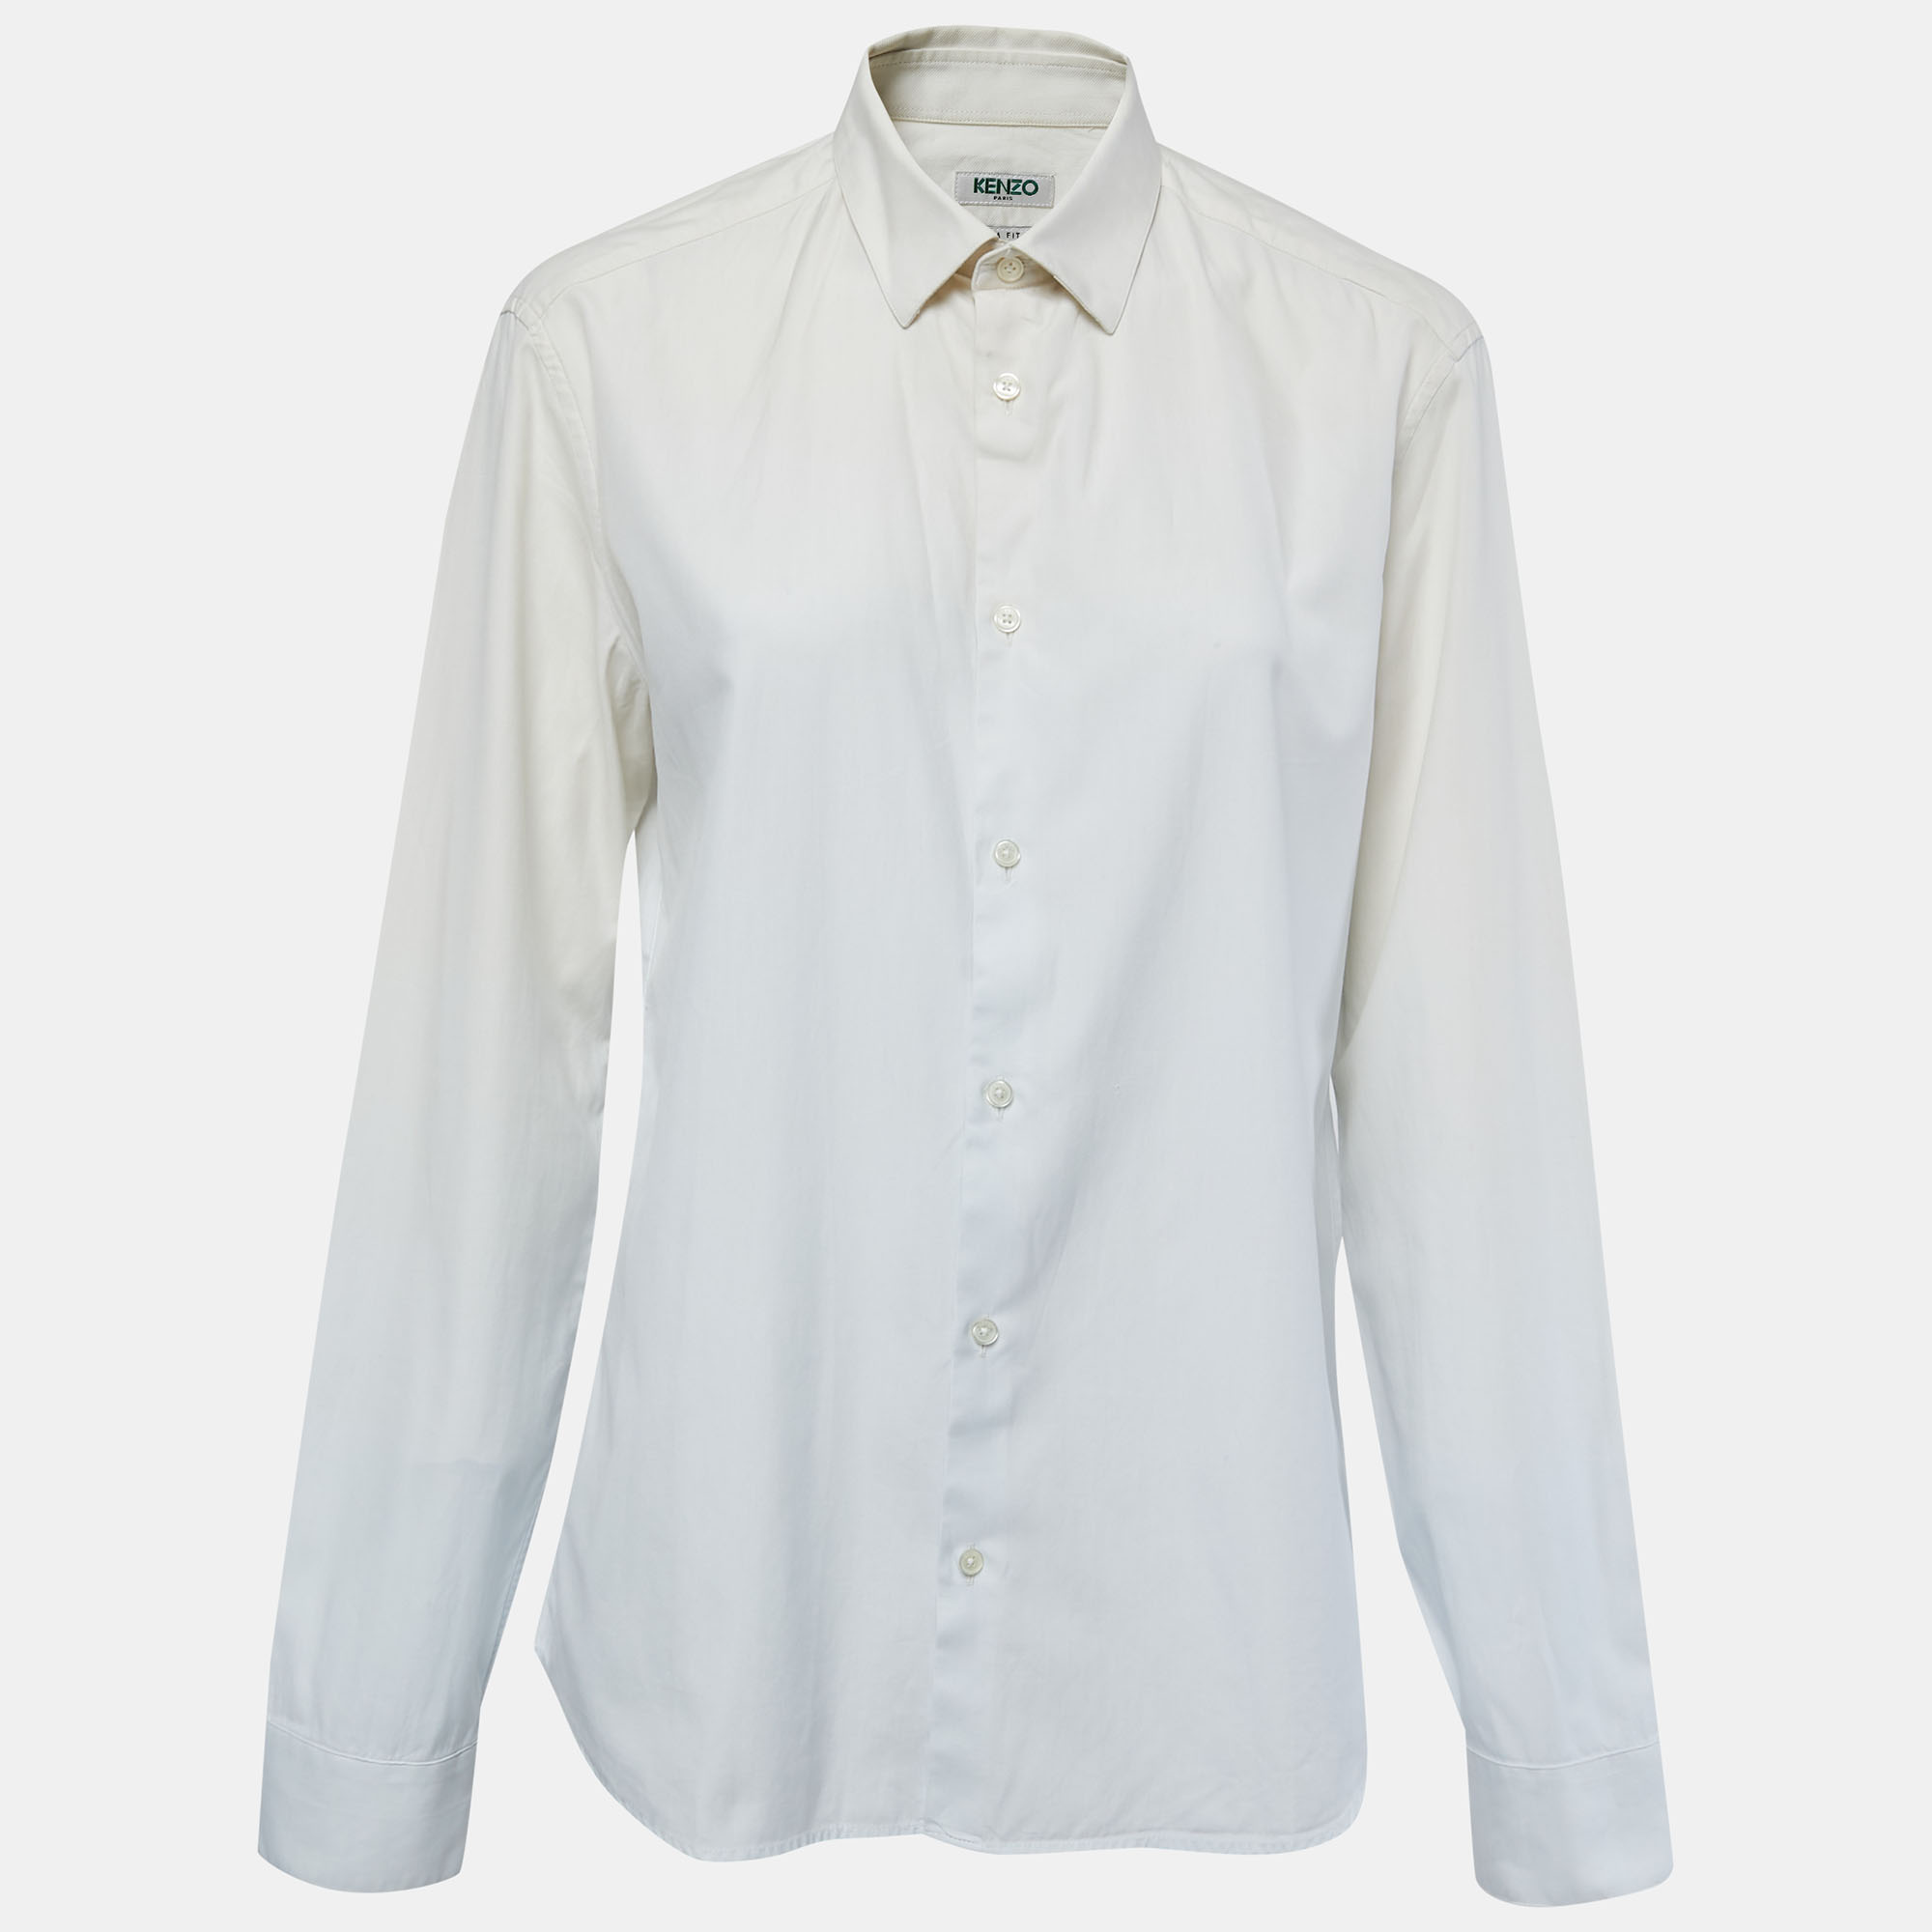 Pre-owned Kenzo Cream & White Cotton Button Front Shirt M